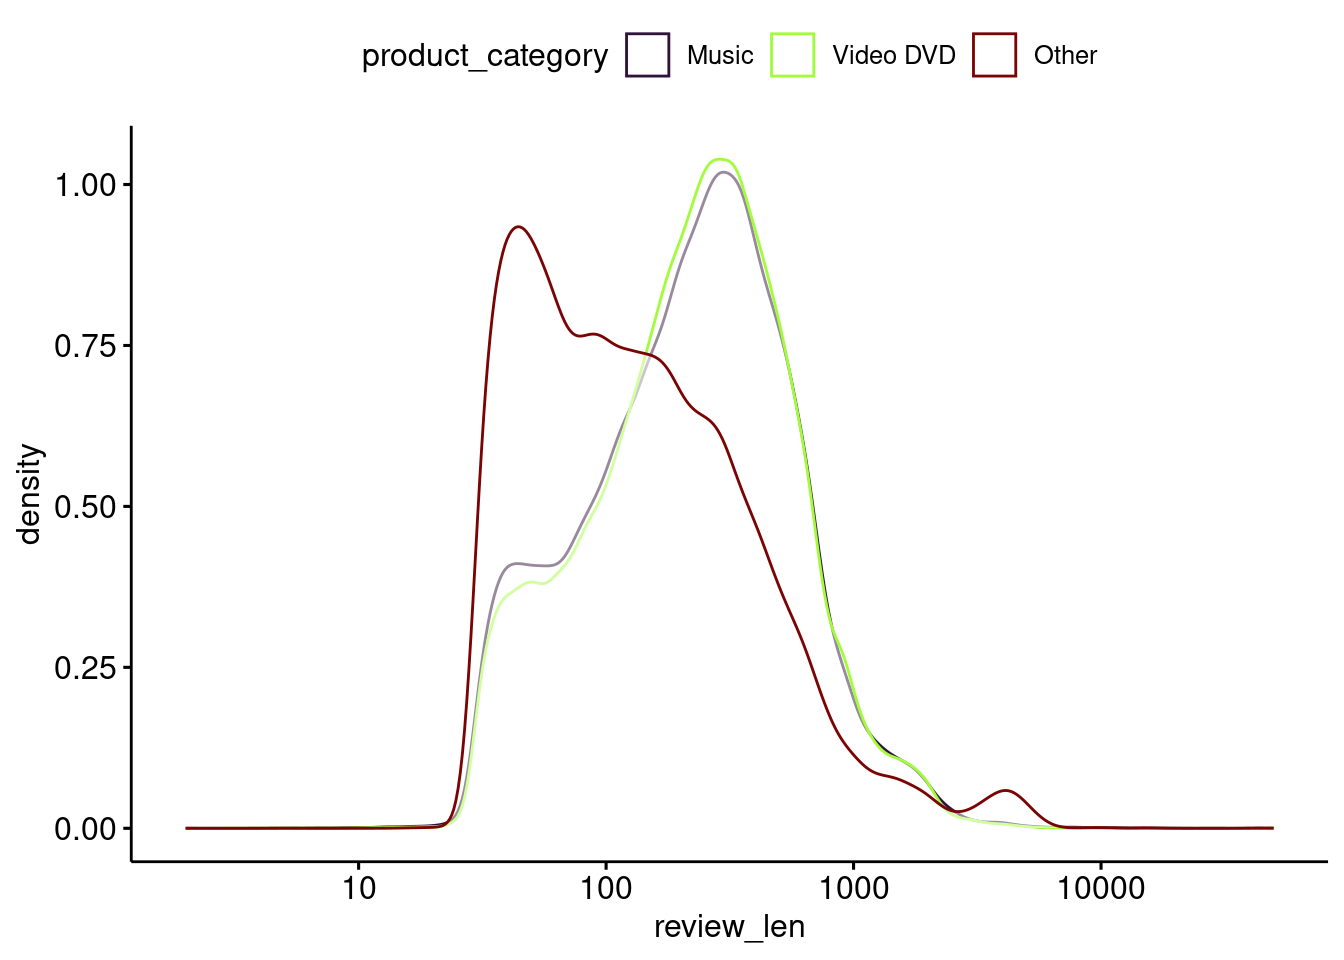 Density plot of review length colored by product categories.